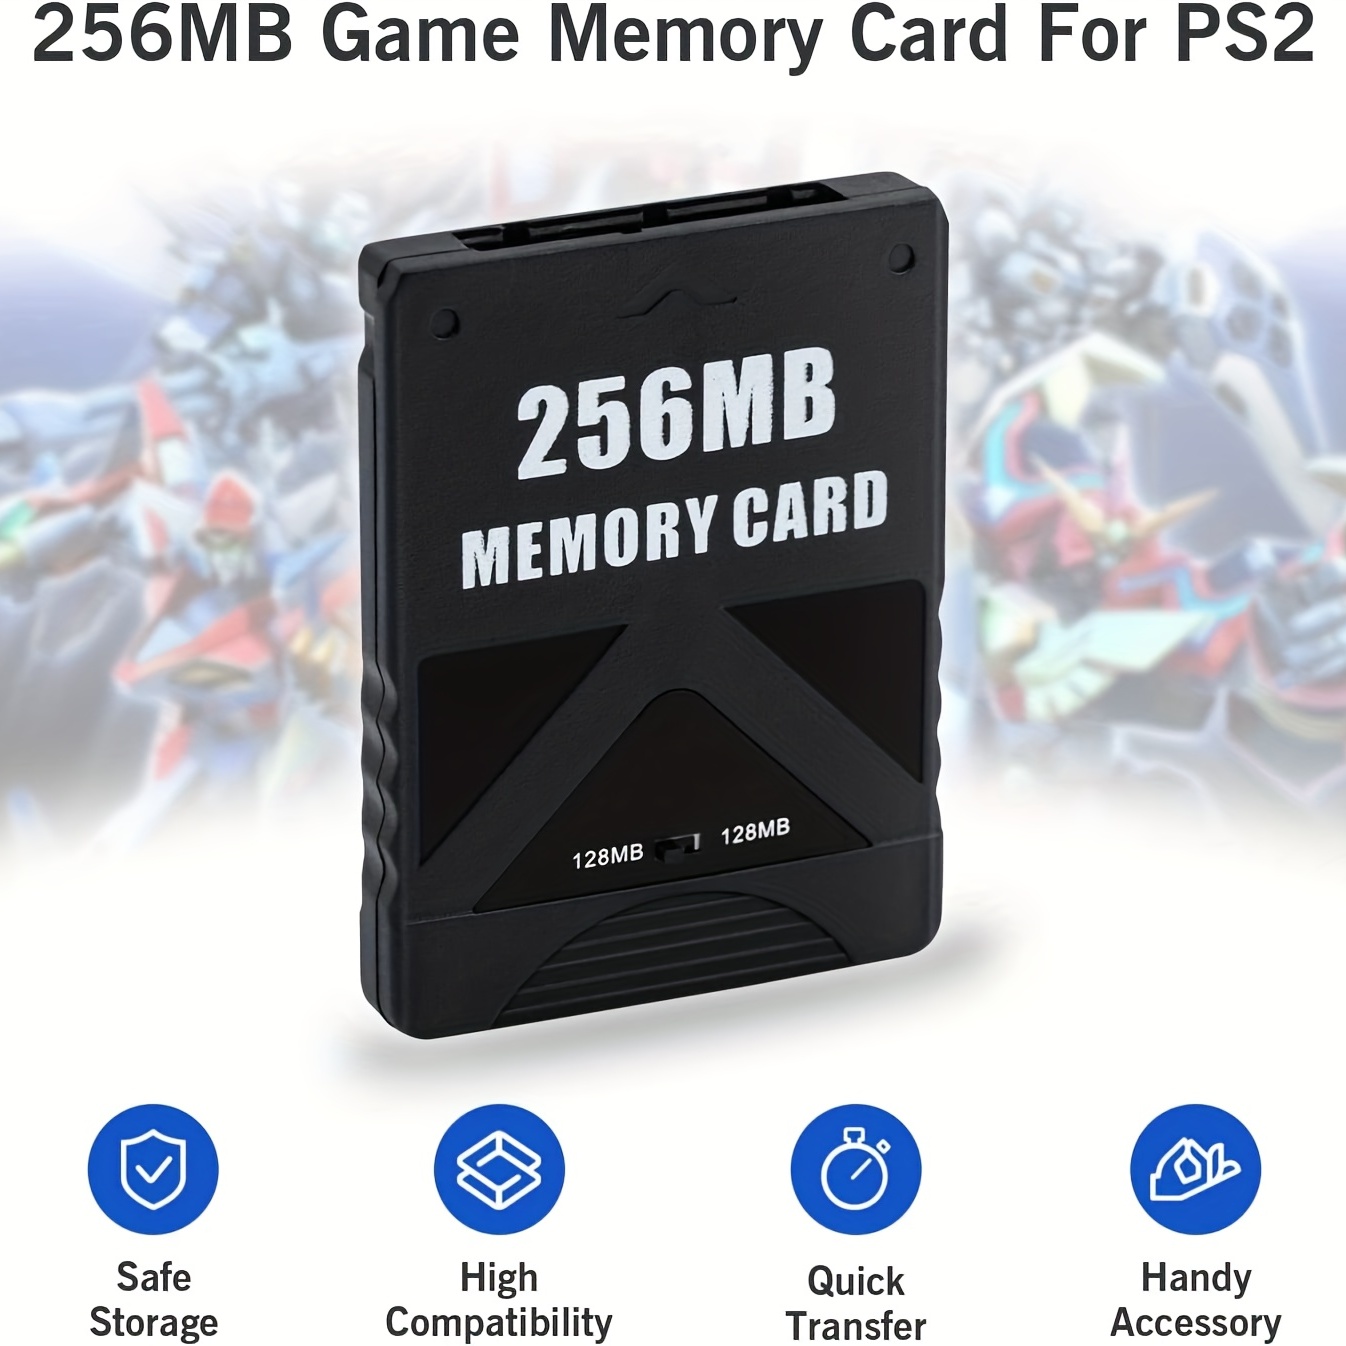 PS2 Memory Card 256MB For Sony PlayStation 2 Game Saves Pack High